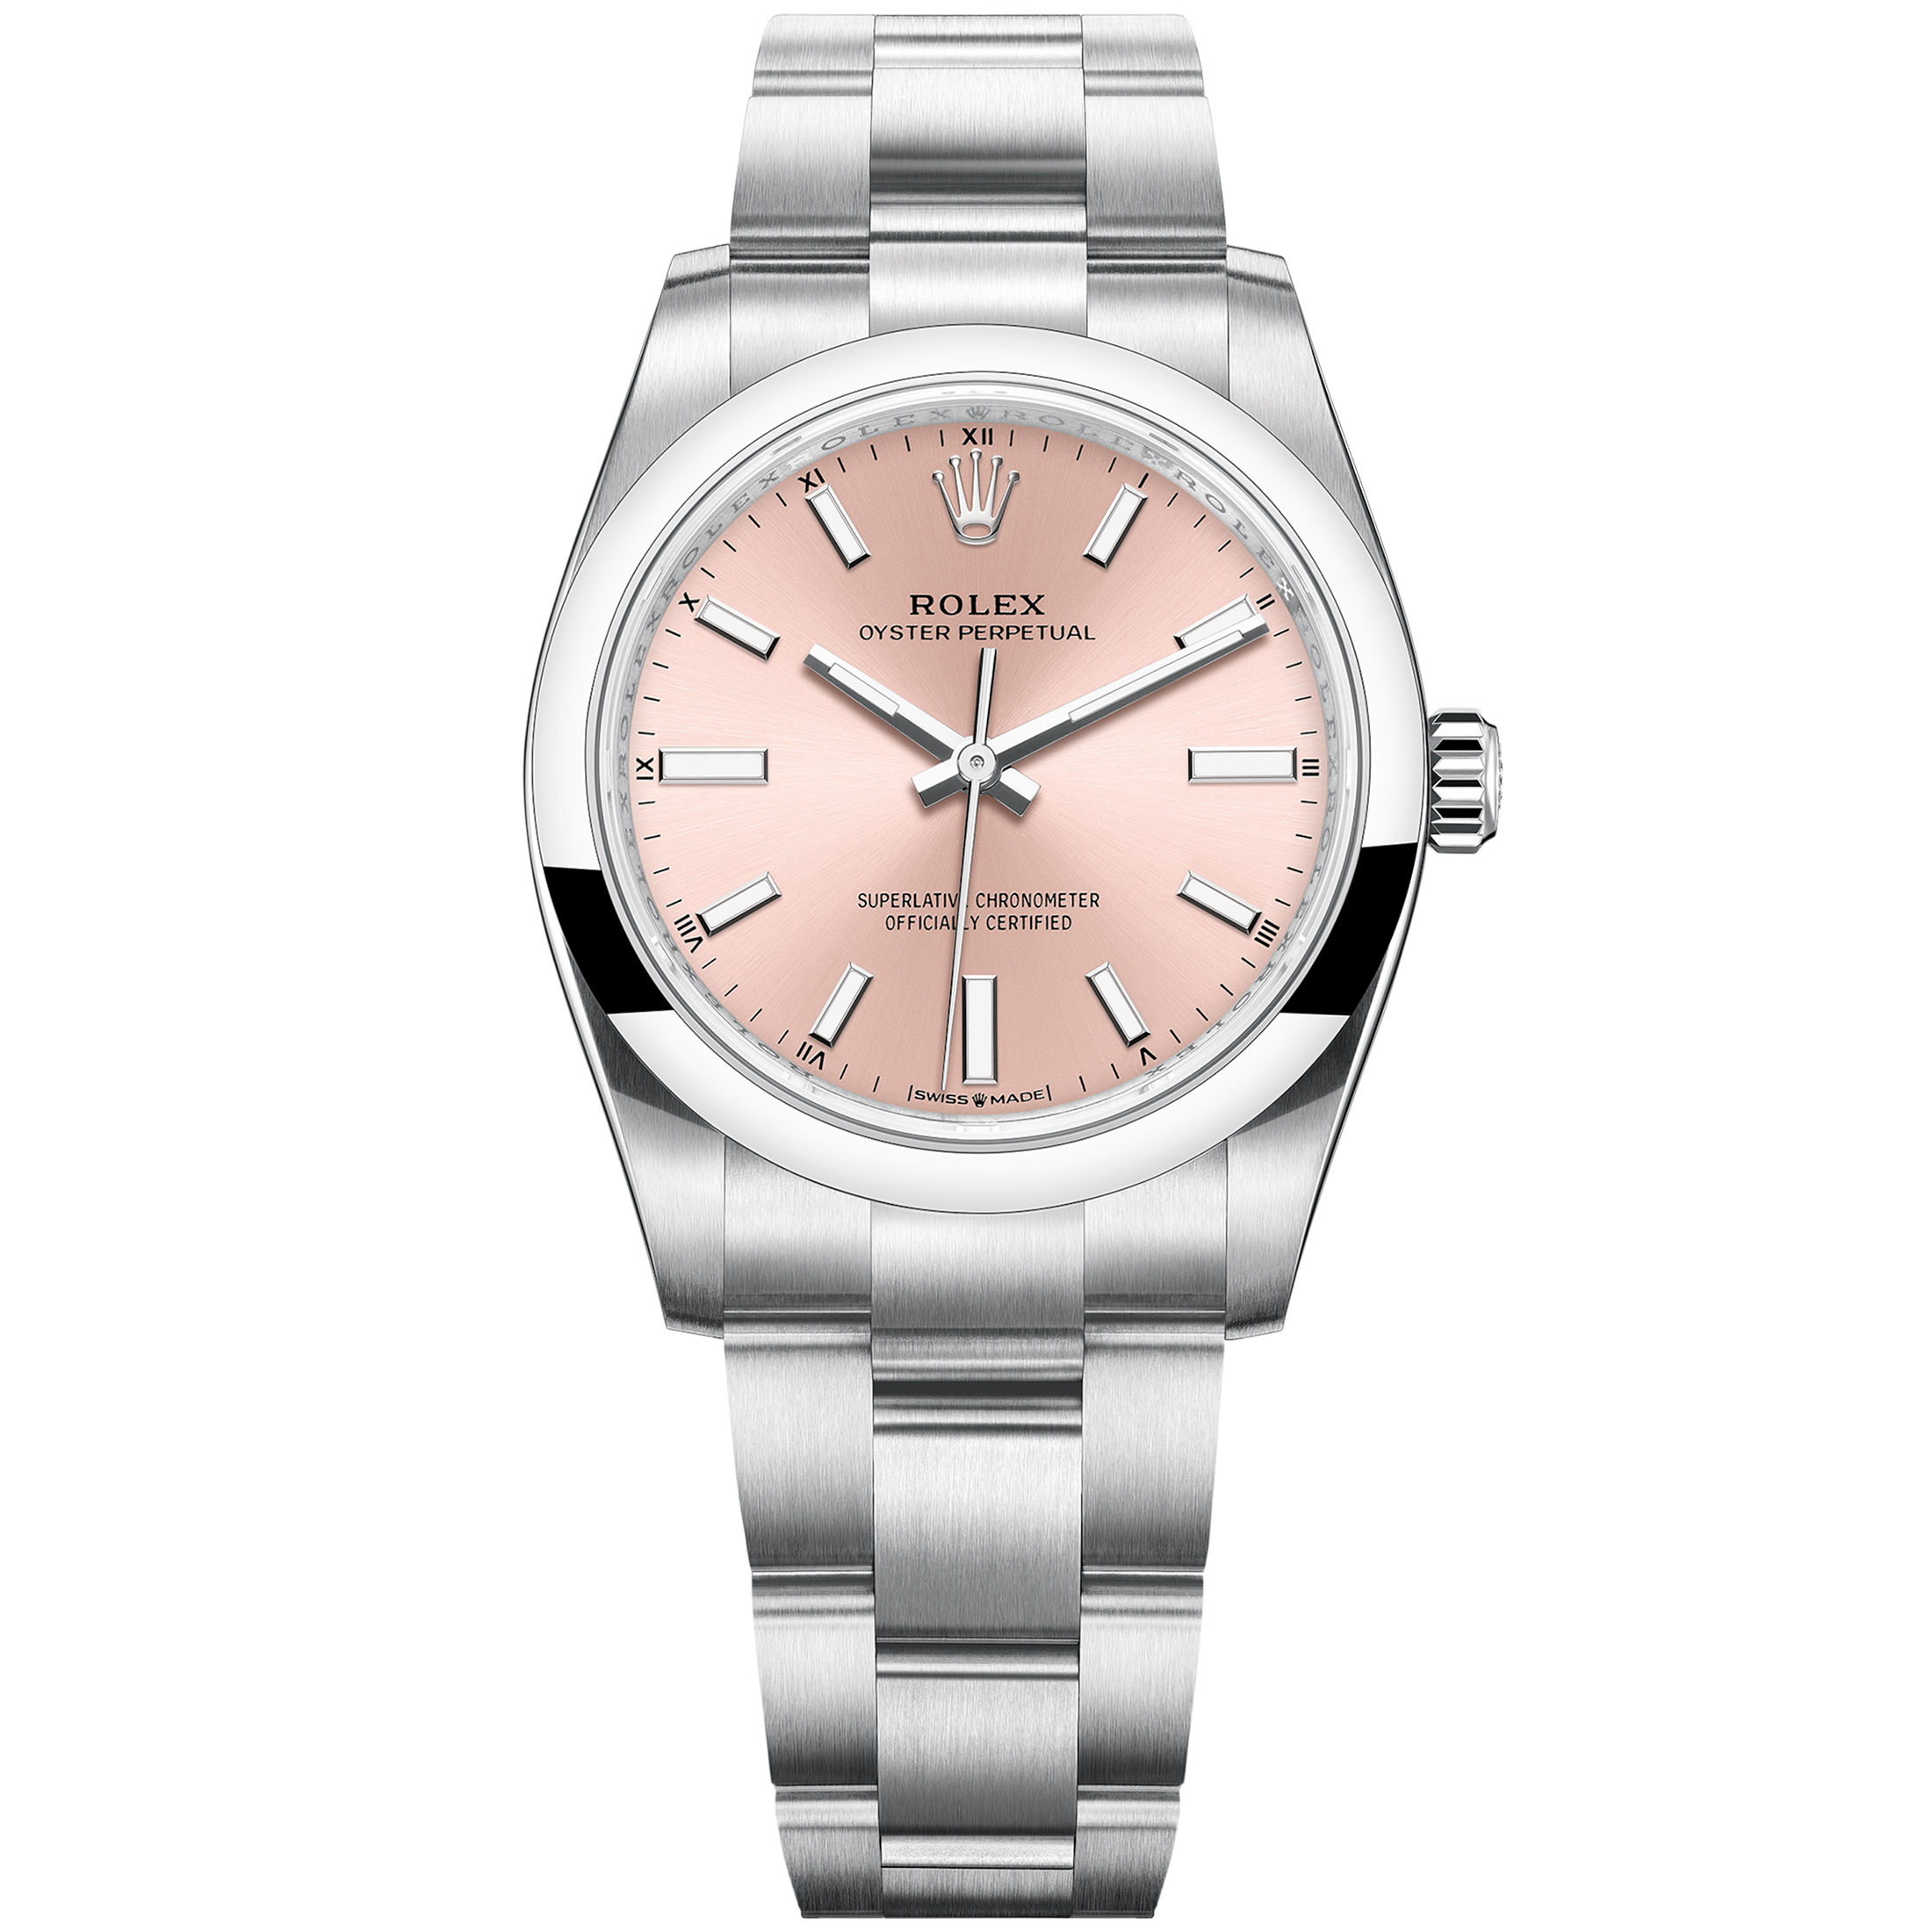 Introducing: The New Rolex Release You 